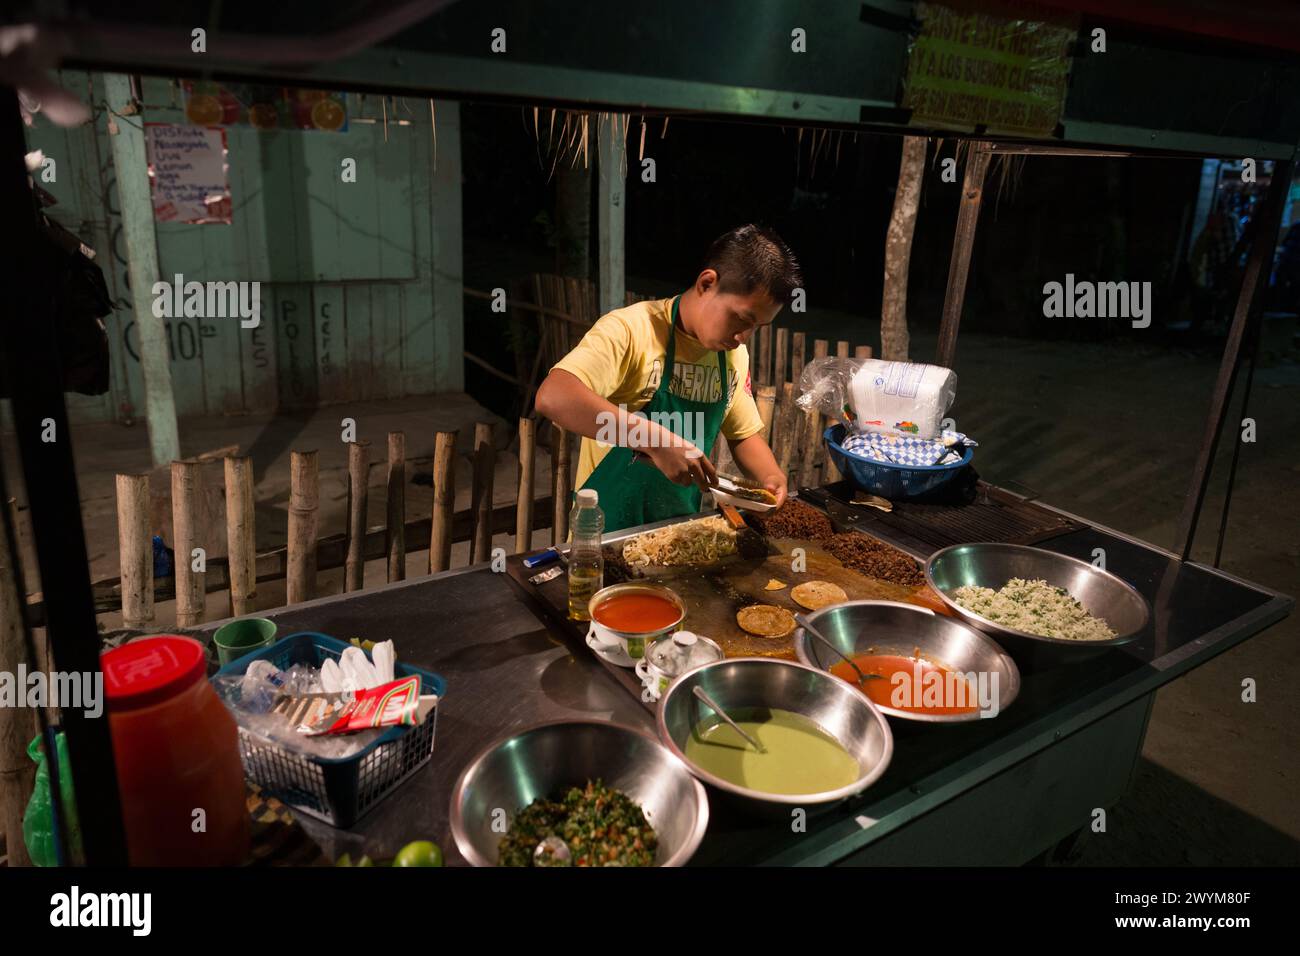 Street food vendors along the lakefront of Lake Peten in Flores city, Guatemala Stock Photo